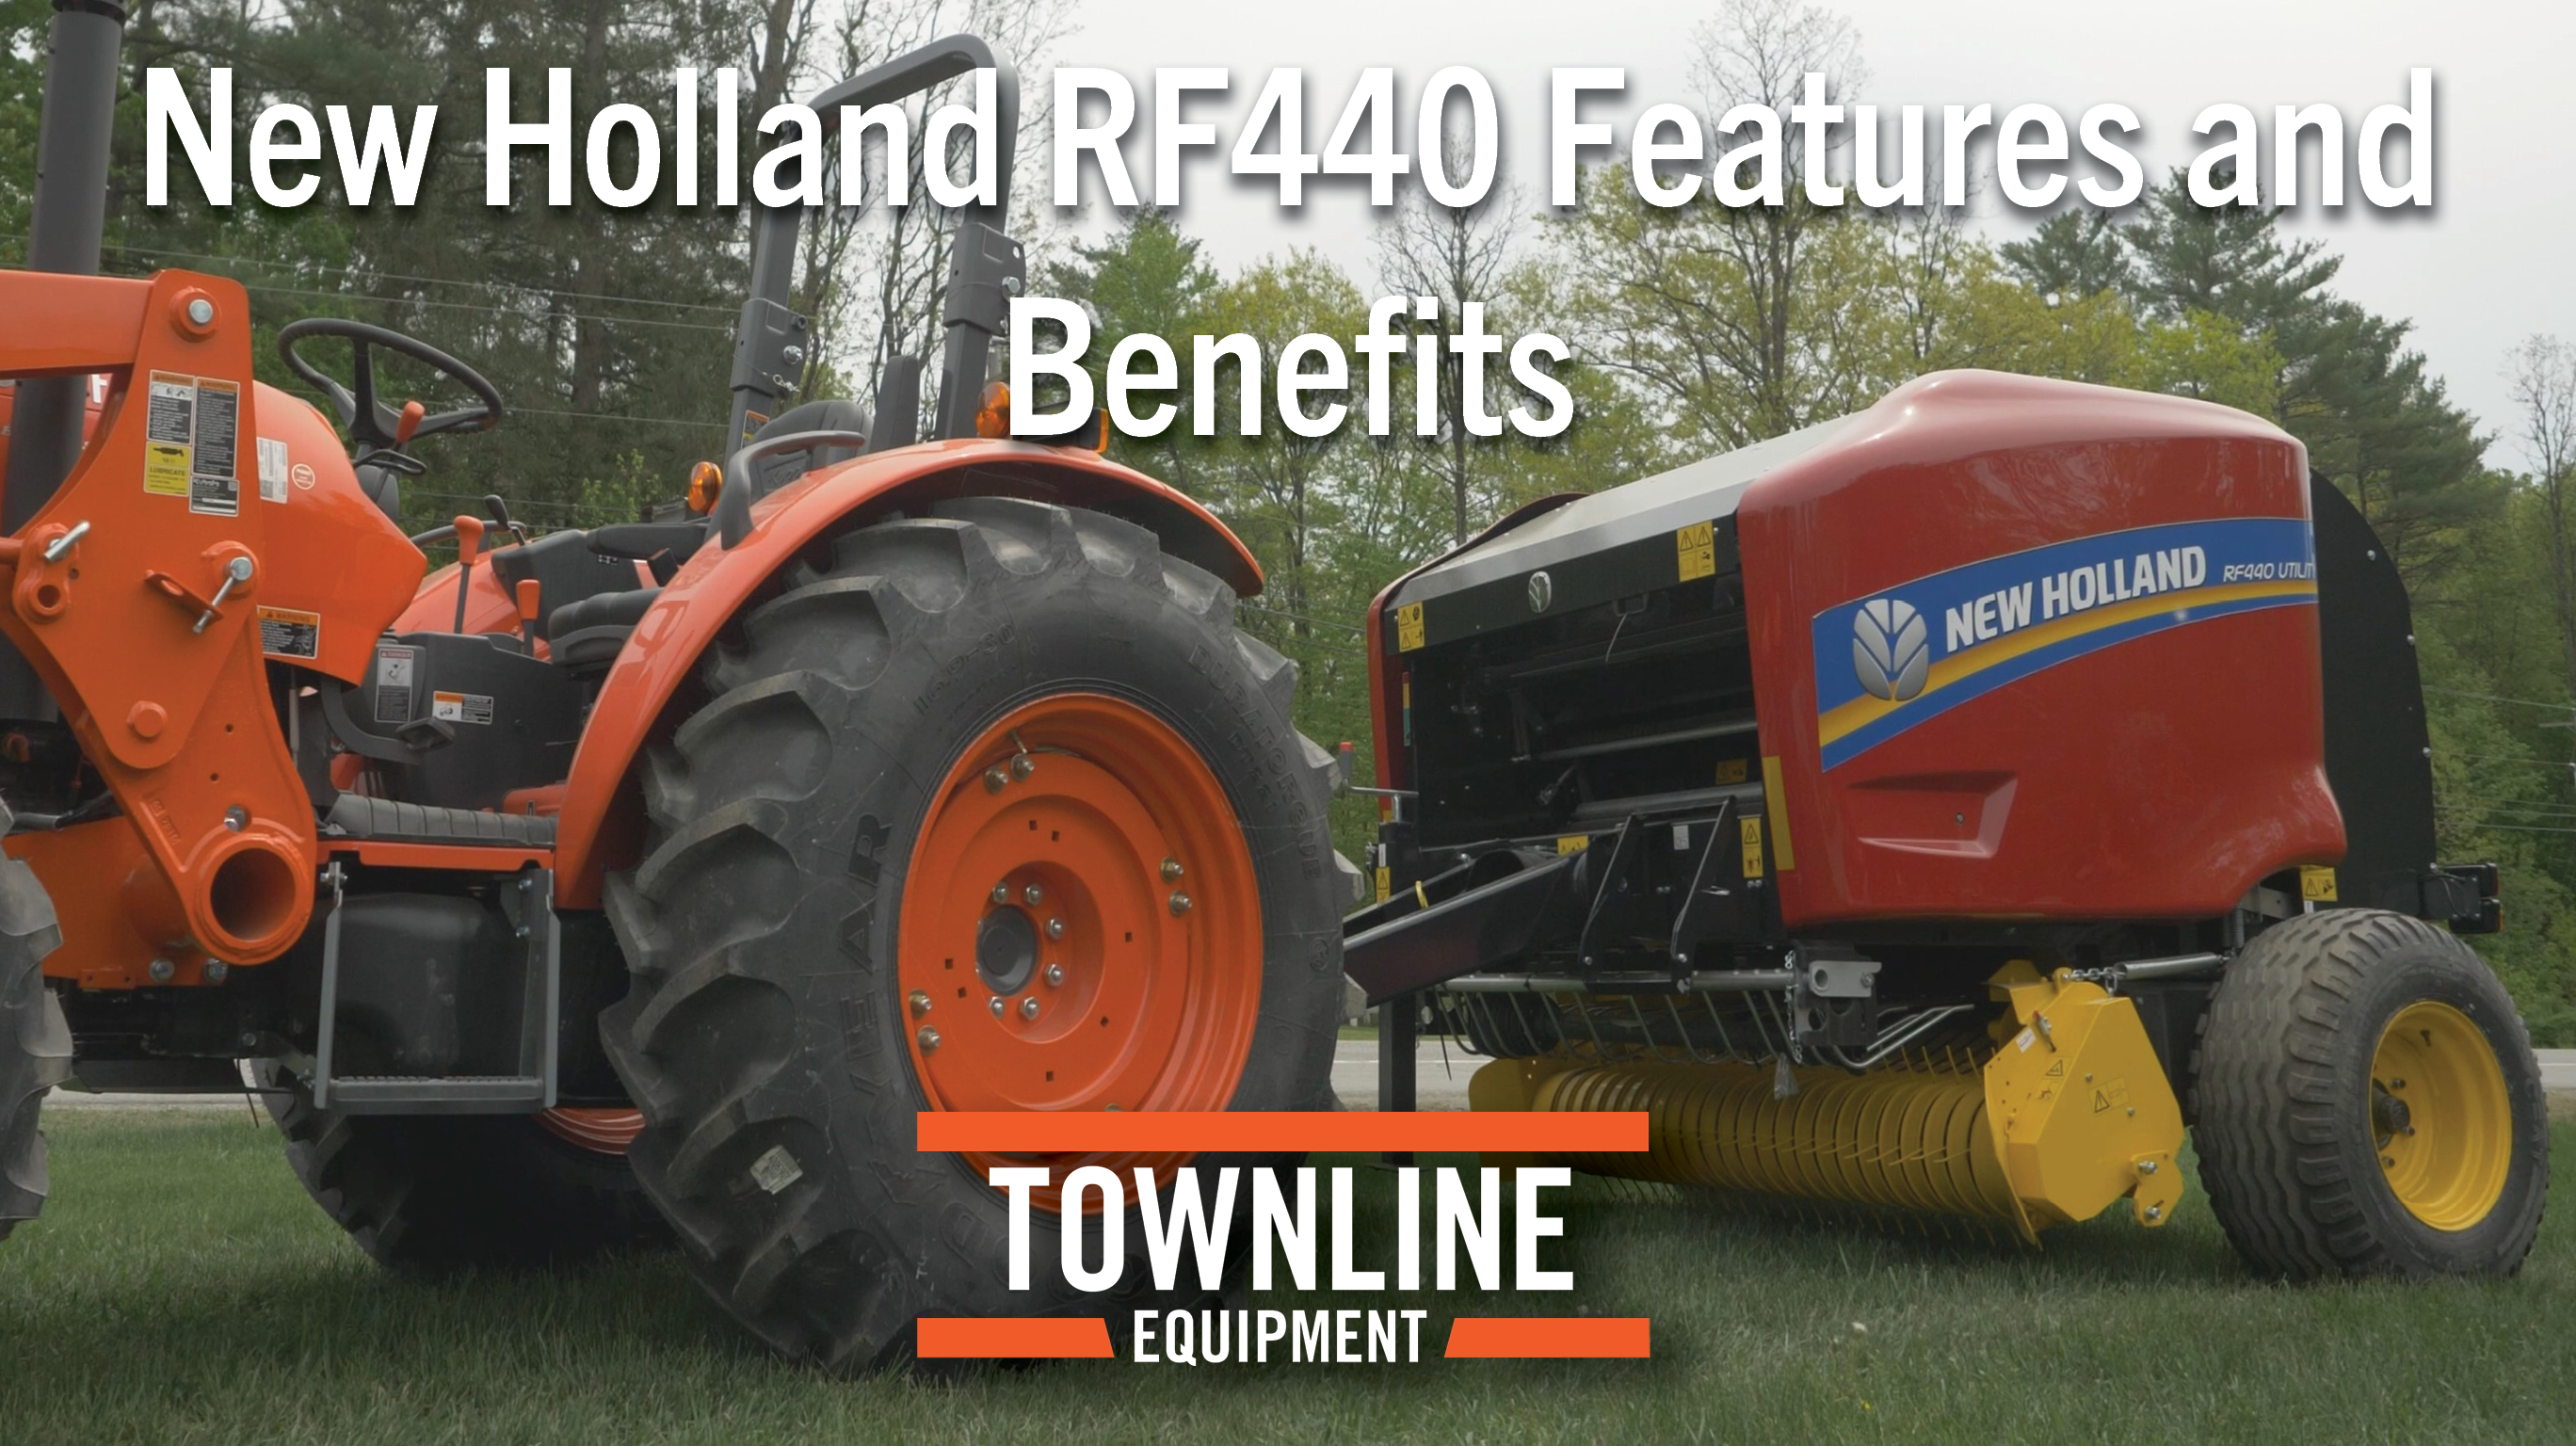 New Holland RF440 Benefits and Features